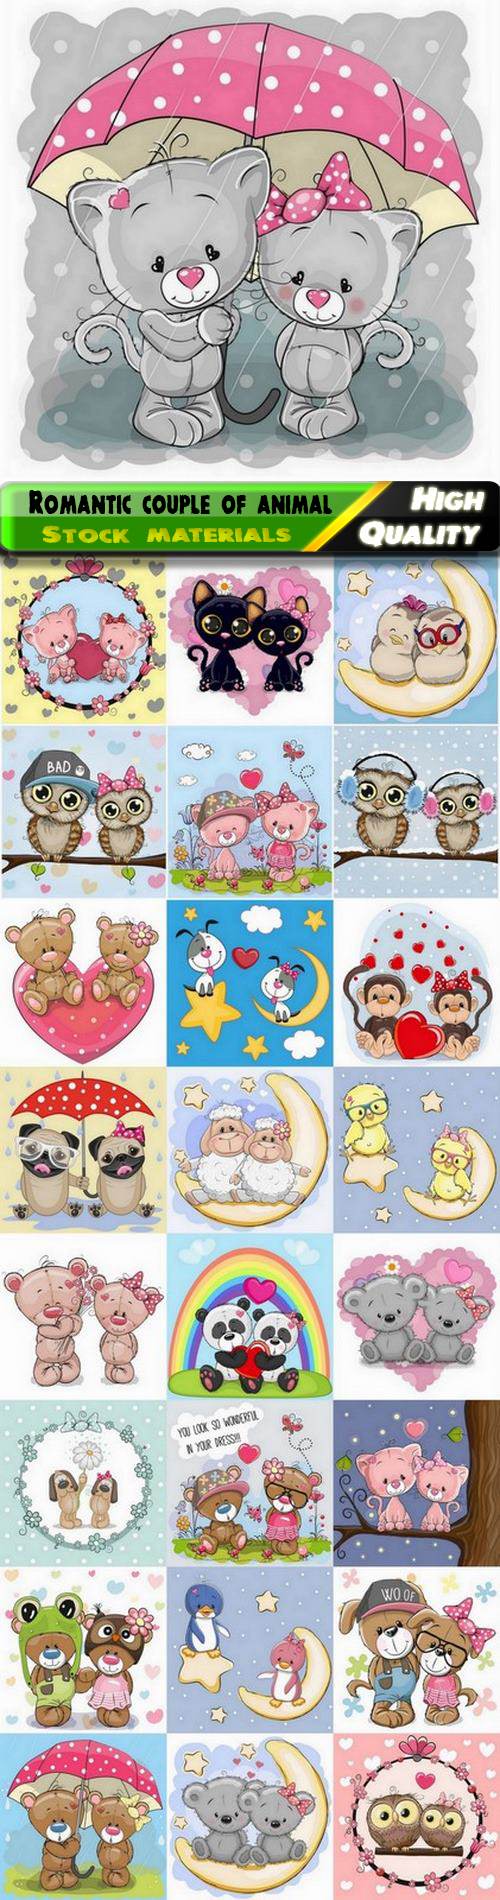 Cartoon animal romantic couple in love for valentines day card - 25 Eps